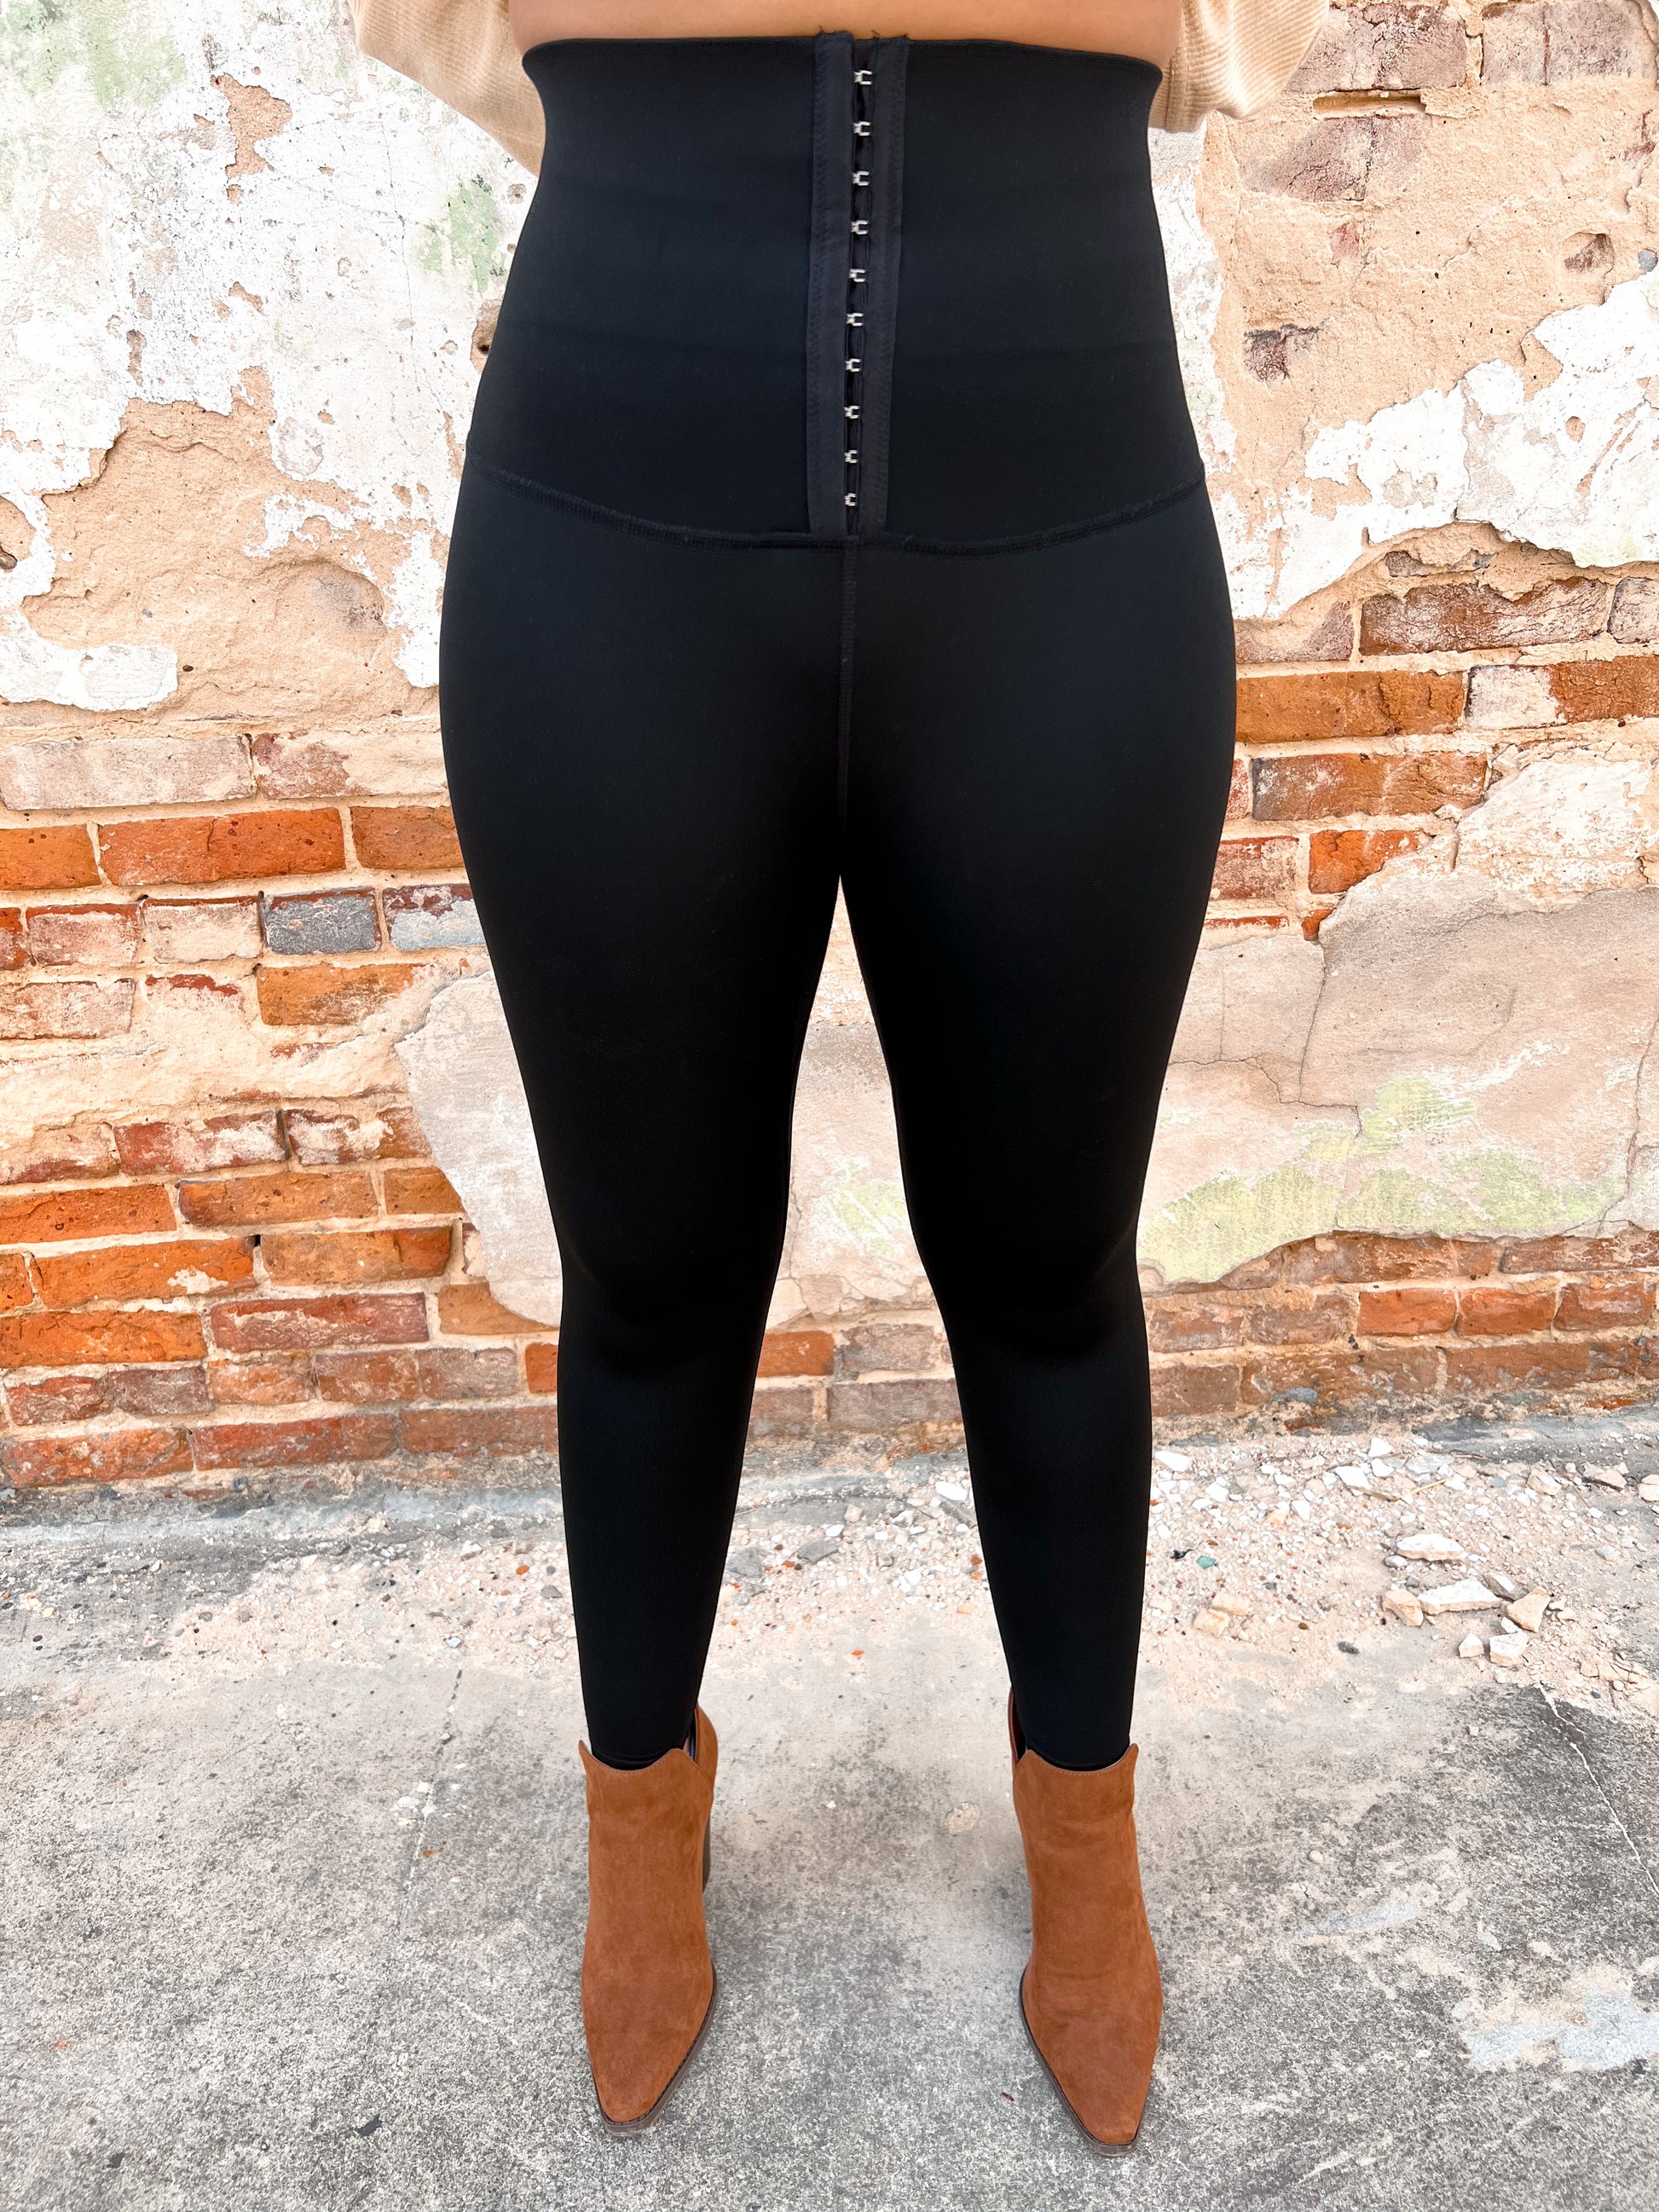 NEW! Sports Leggings with corset detail • SM8561